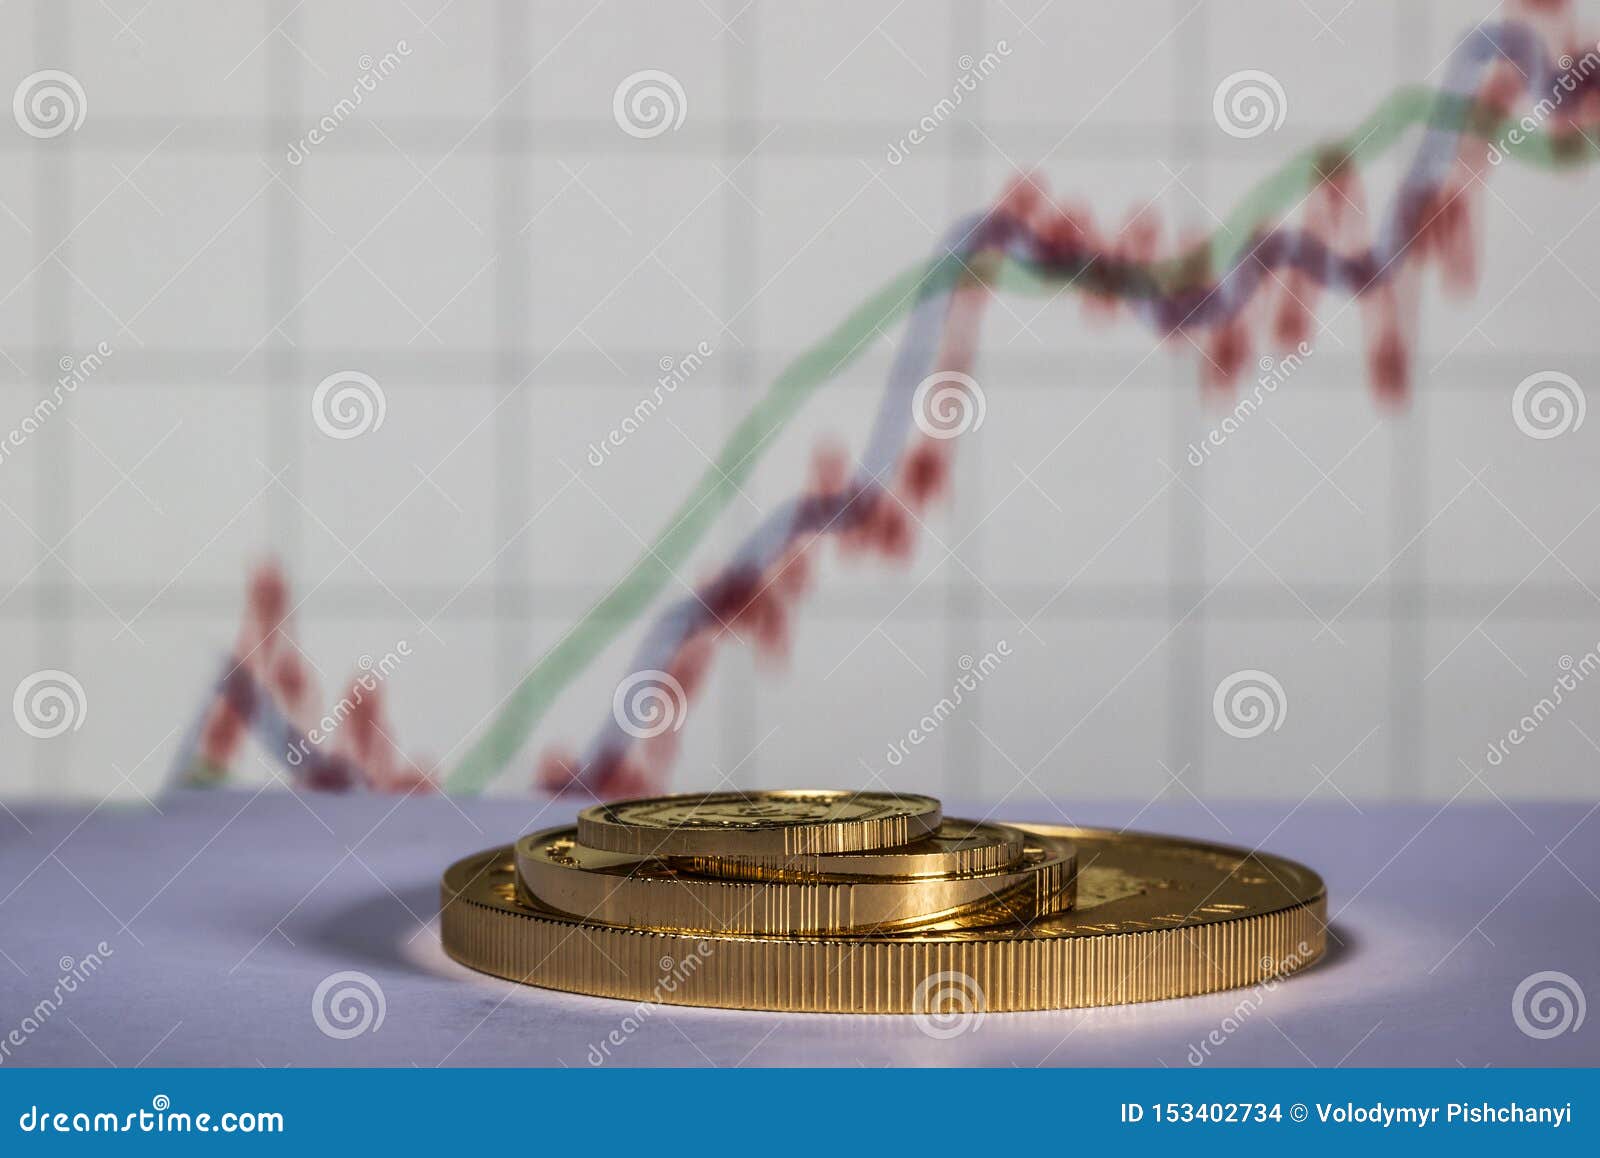 Gold Coins On The Background Of The Growth Chart. Stock ...